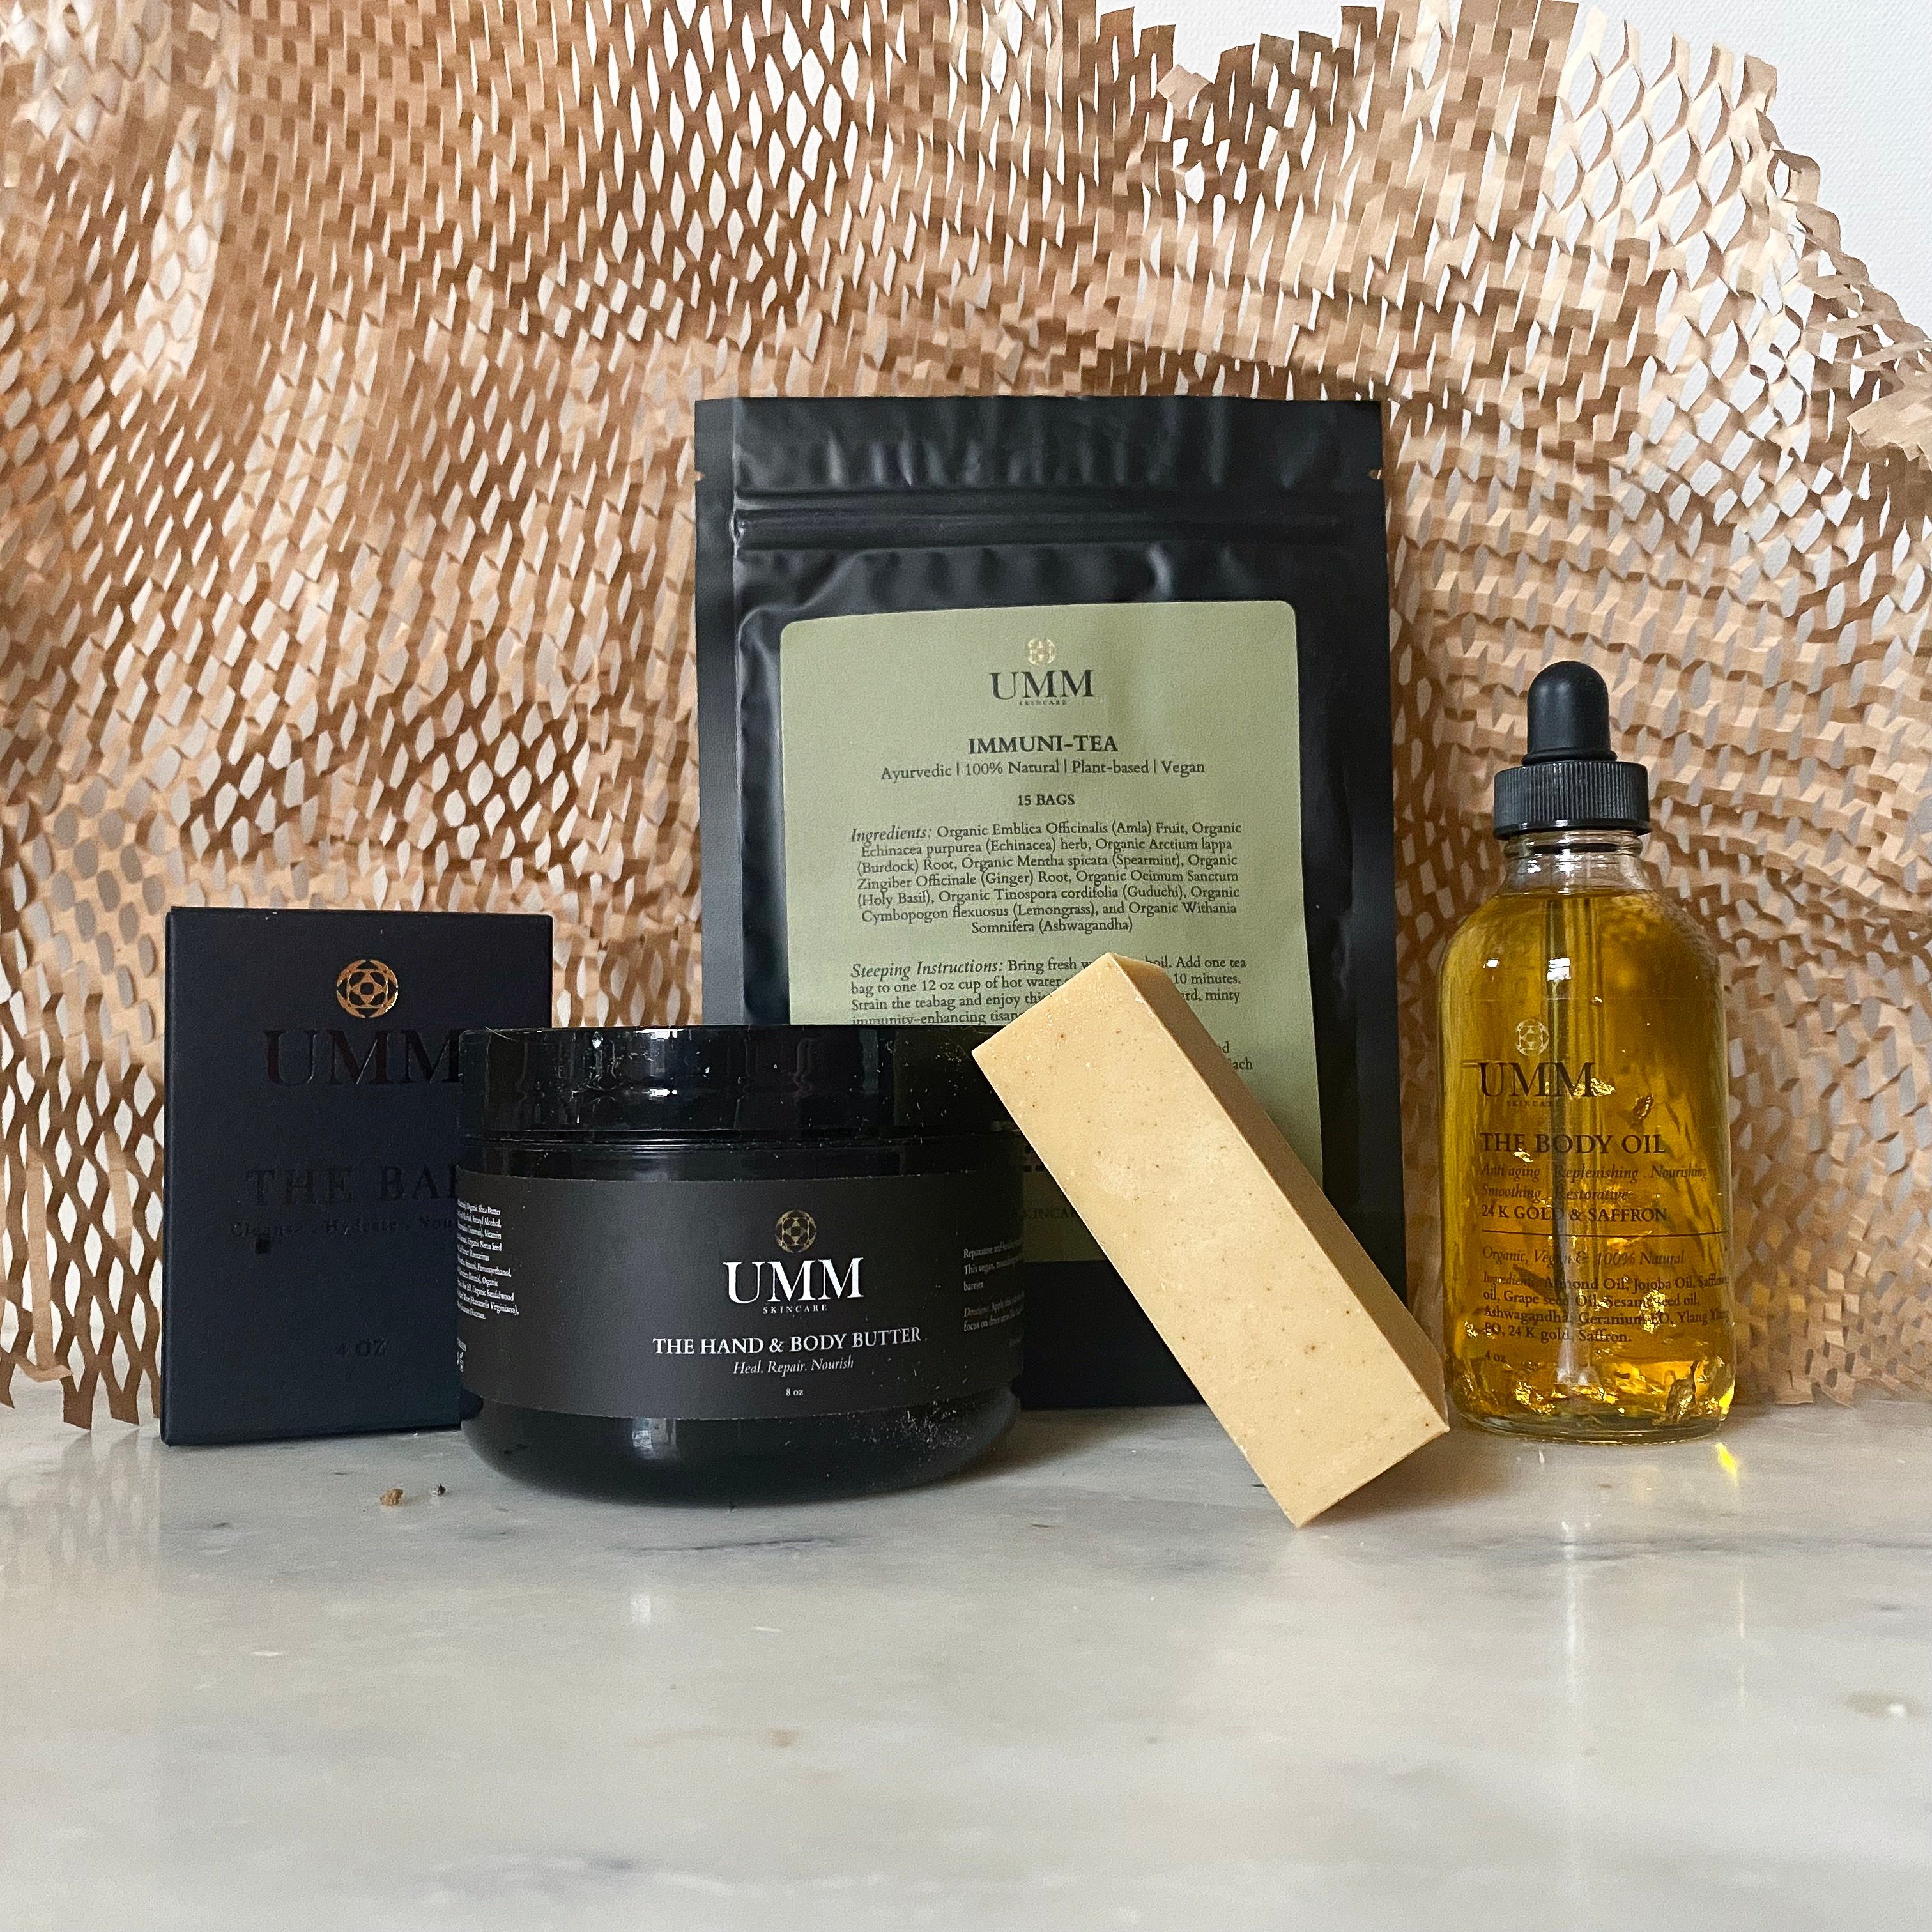 See New: The Skincare Box March/April 2022 Review